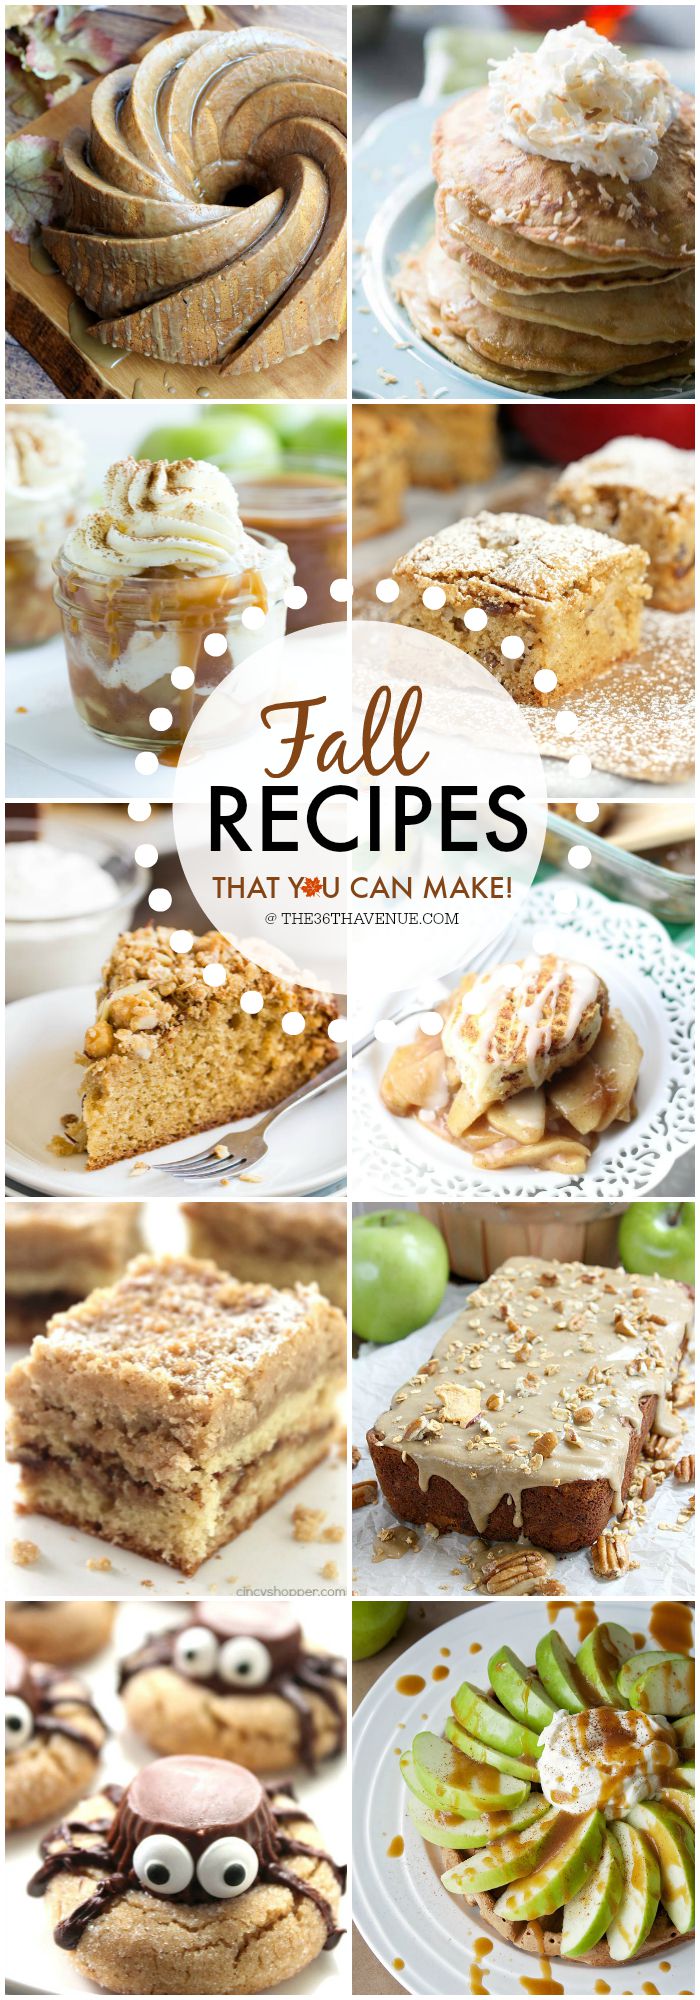 Recipes- The Best Fall Recipes over at the36thavenue.com Oh my goodness, you have to see them all! 